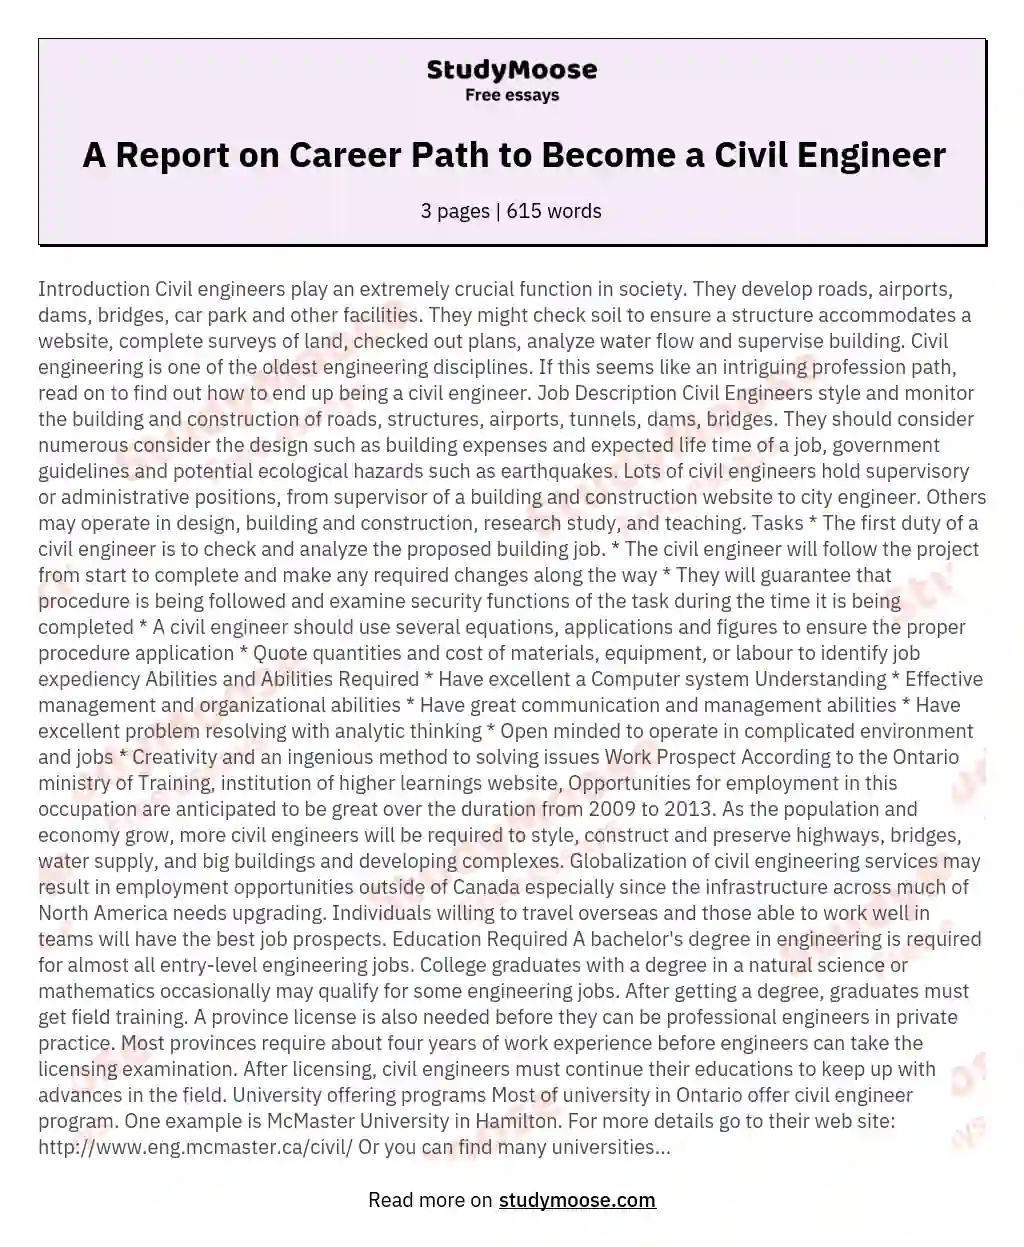 A Report on Career Path to Become a Civil Engineer